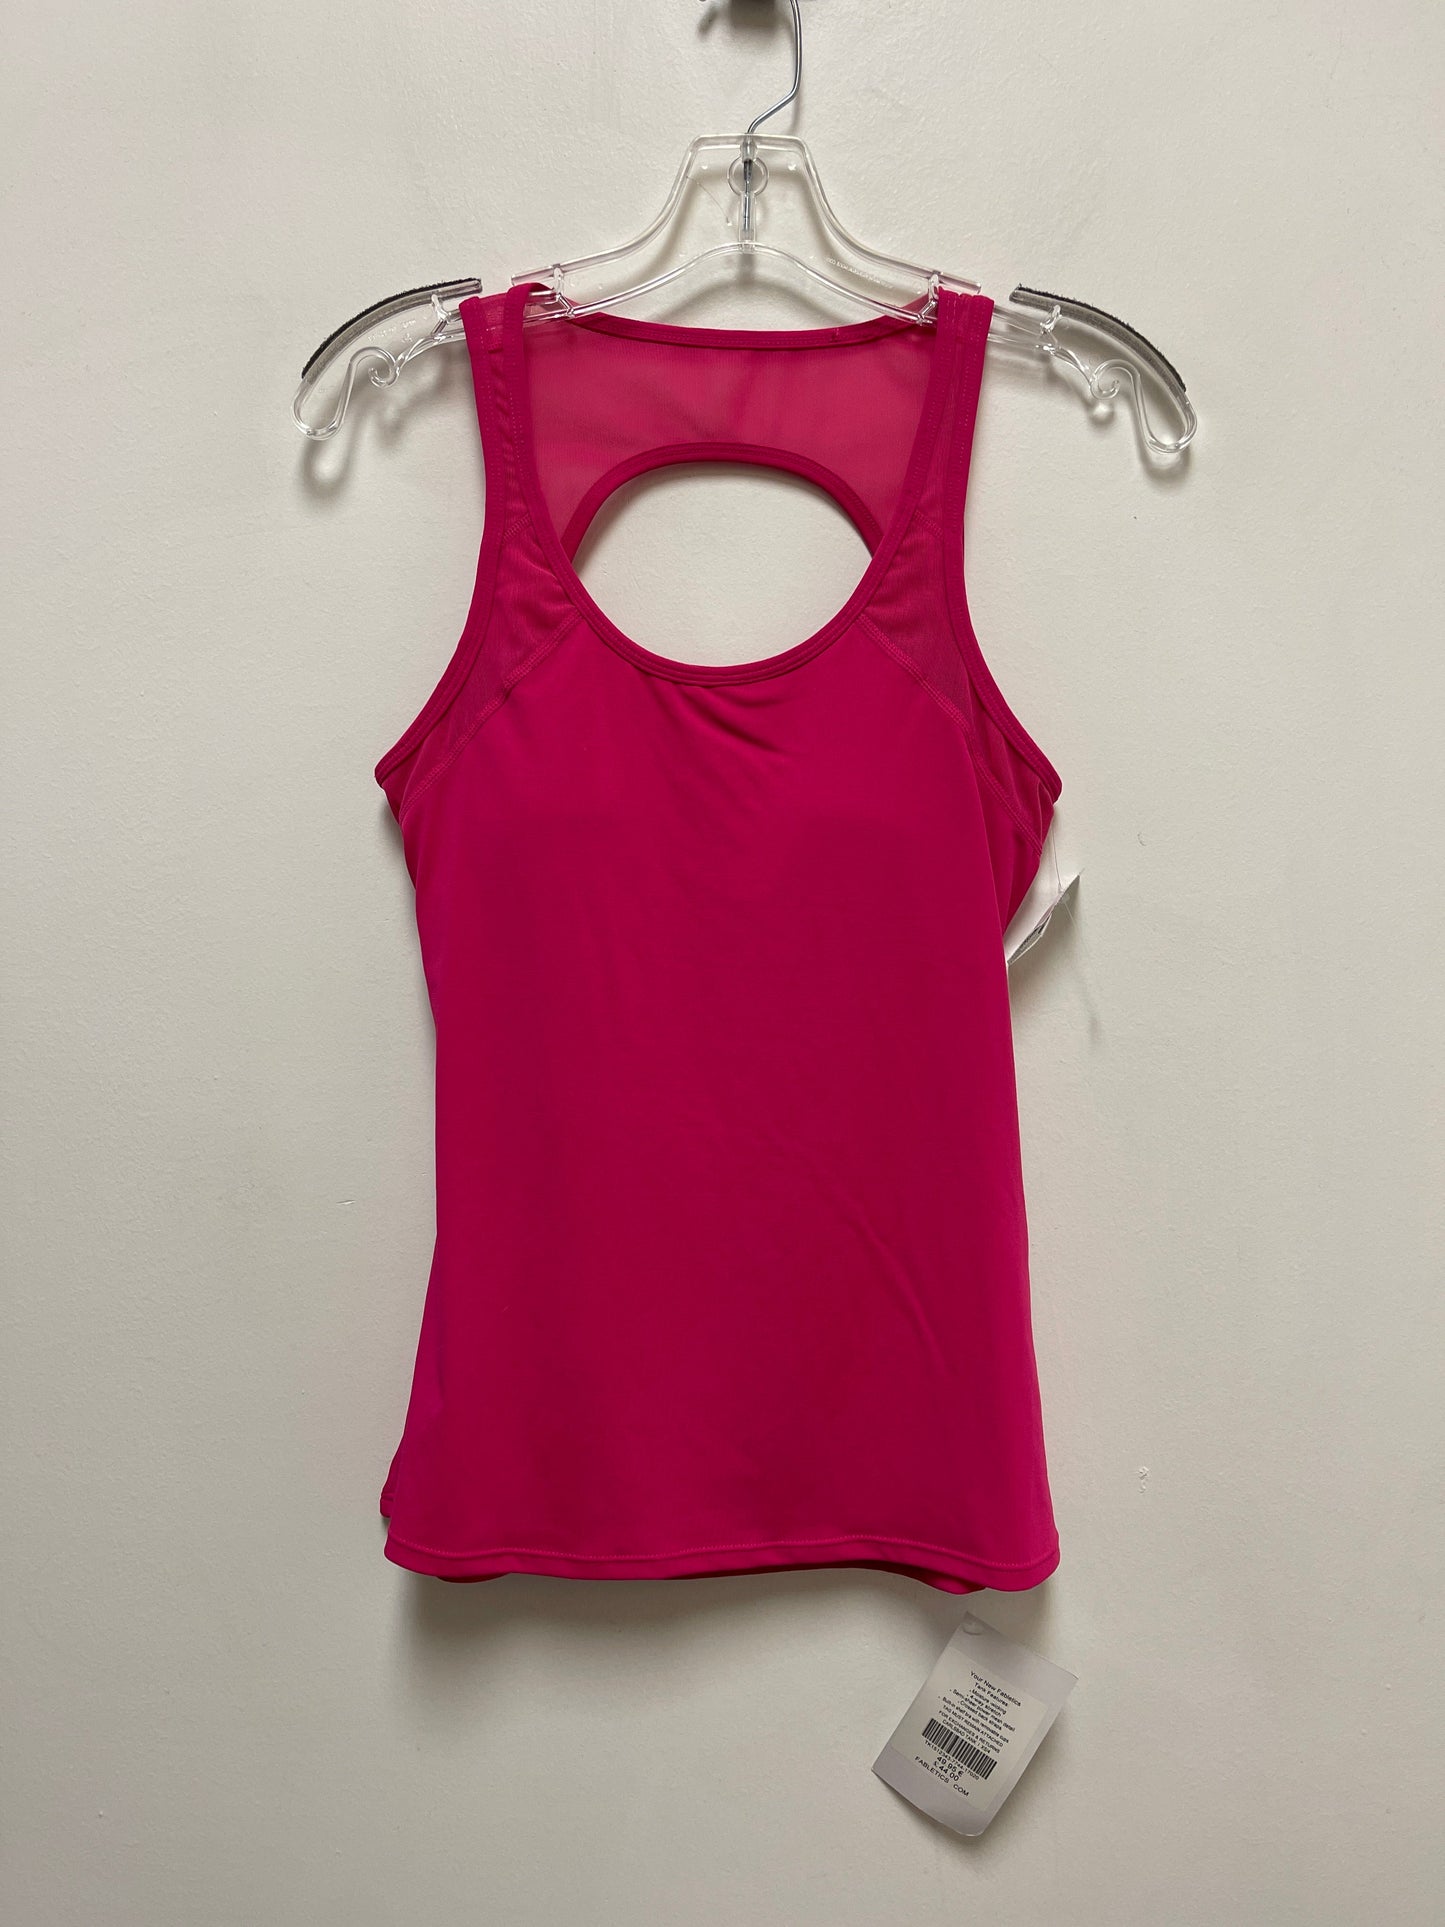 Pink Athletic Tank Top Fabletics, Size Xs